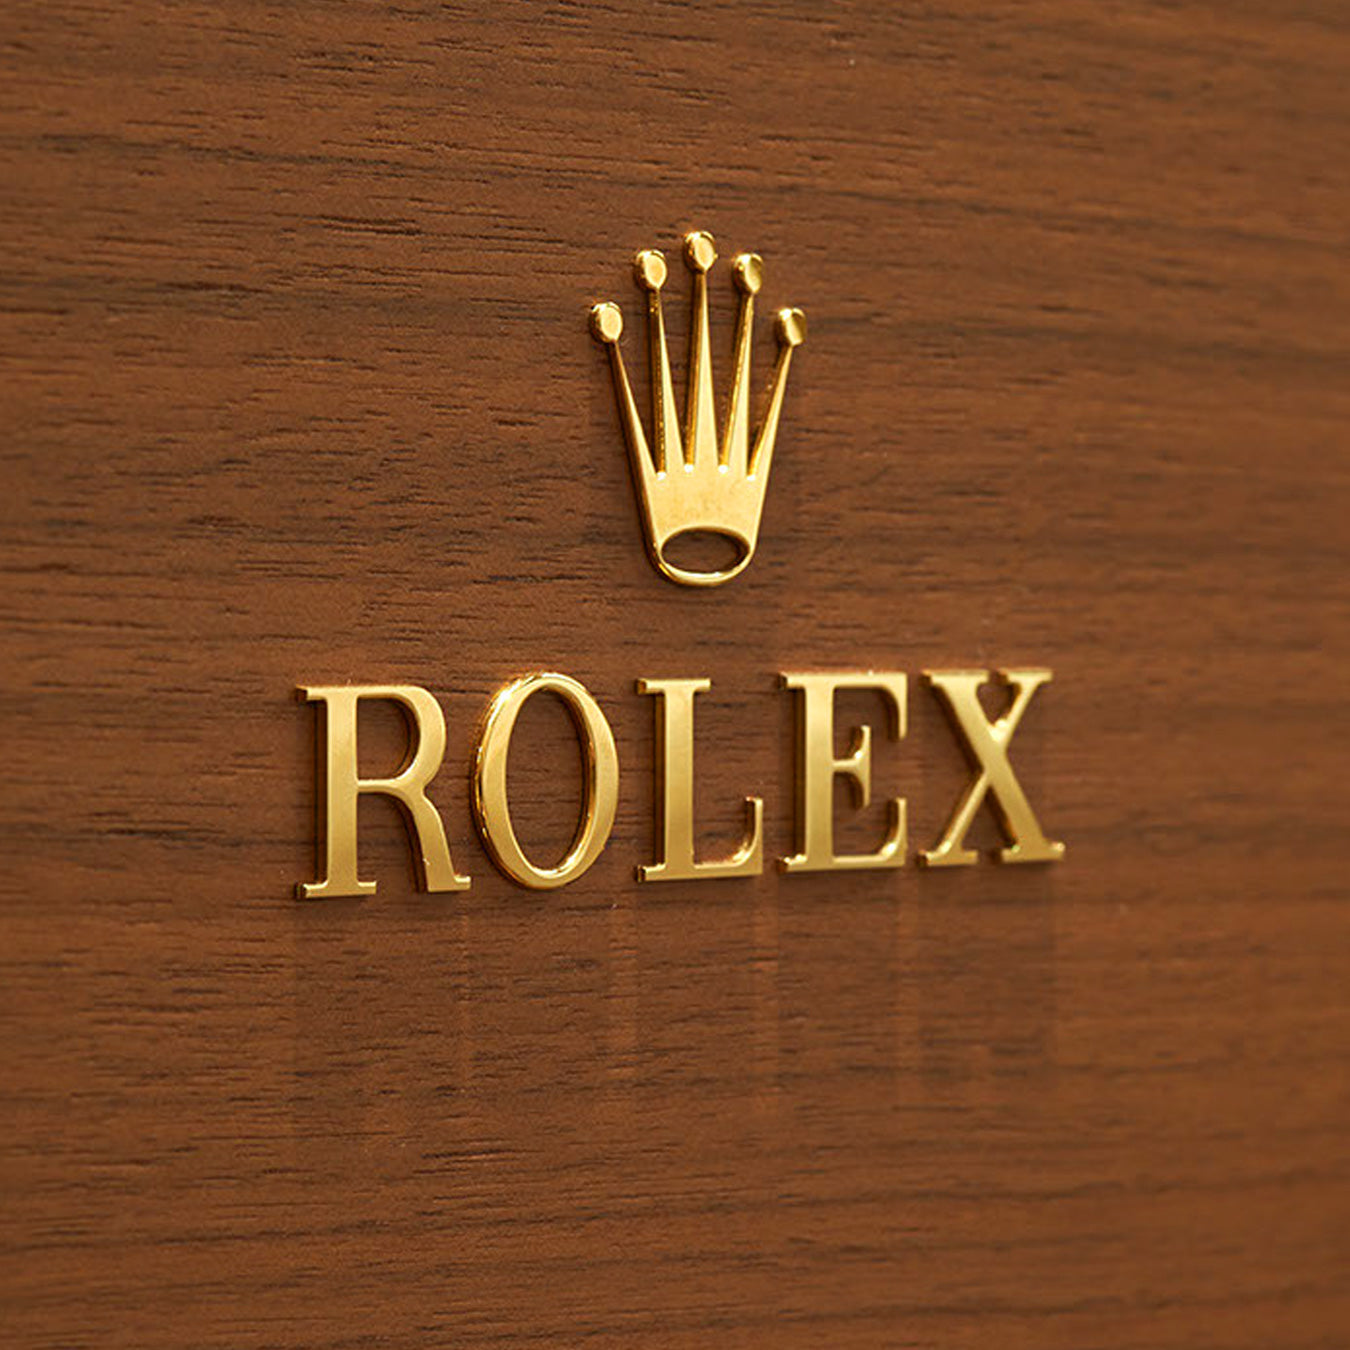 Rolex logo in gold on a wooden background